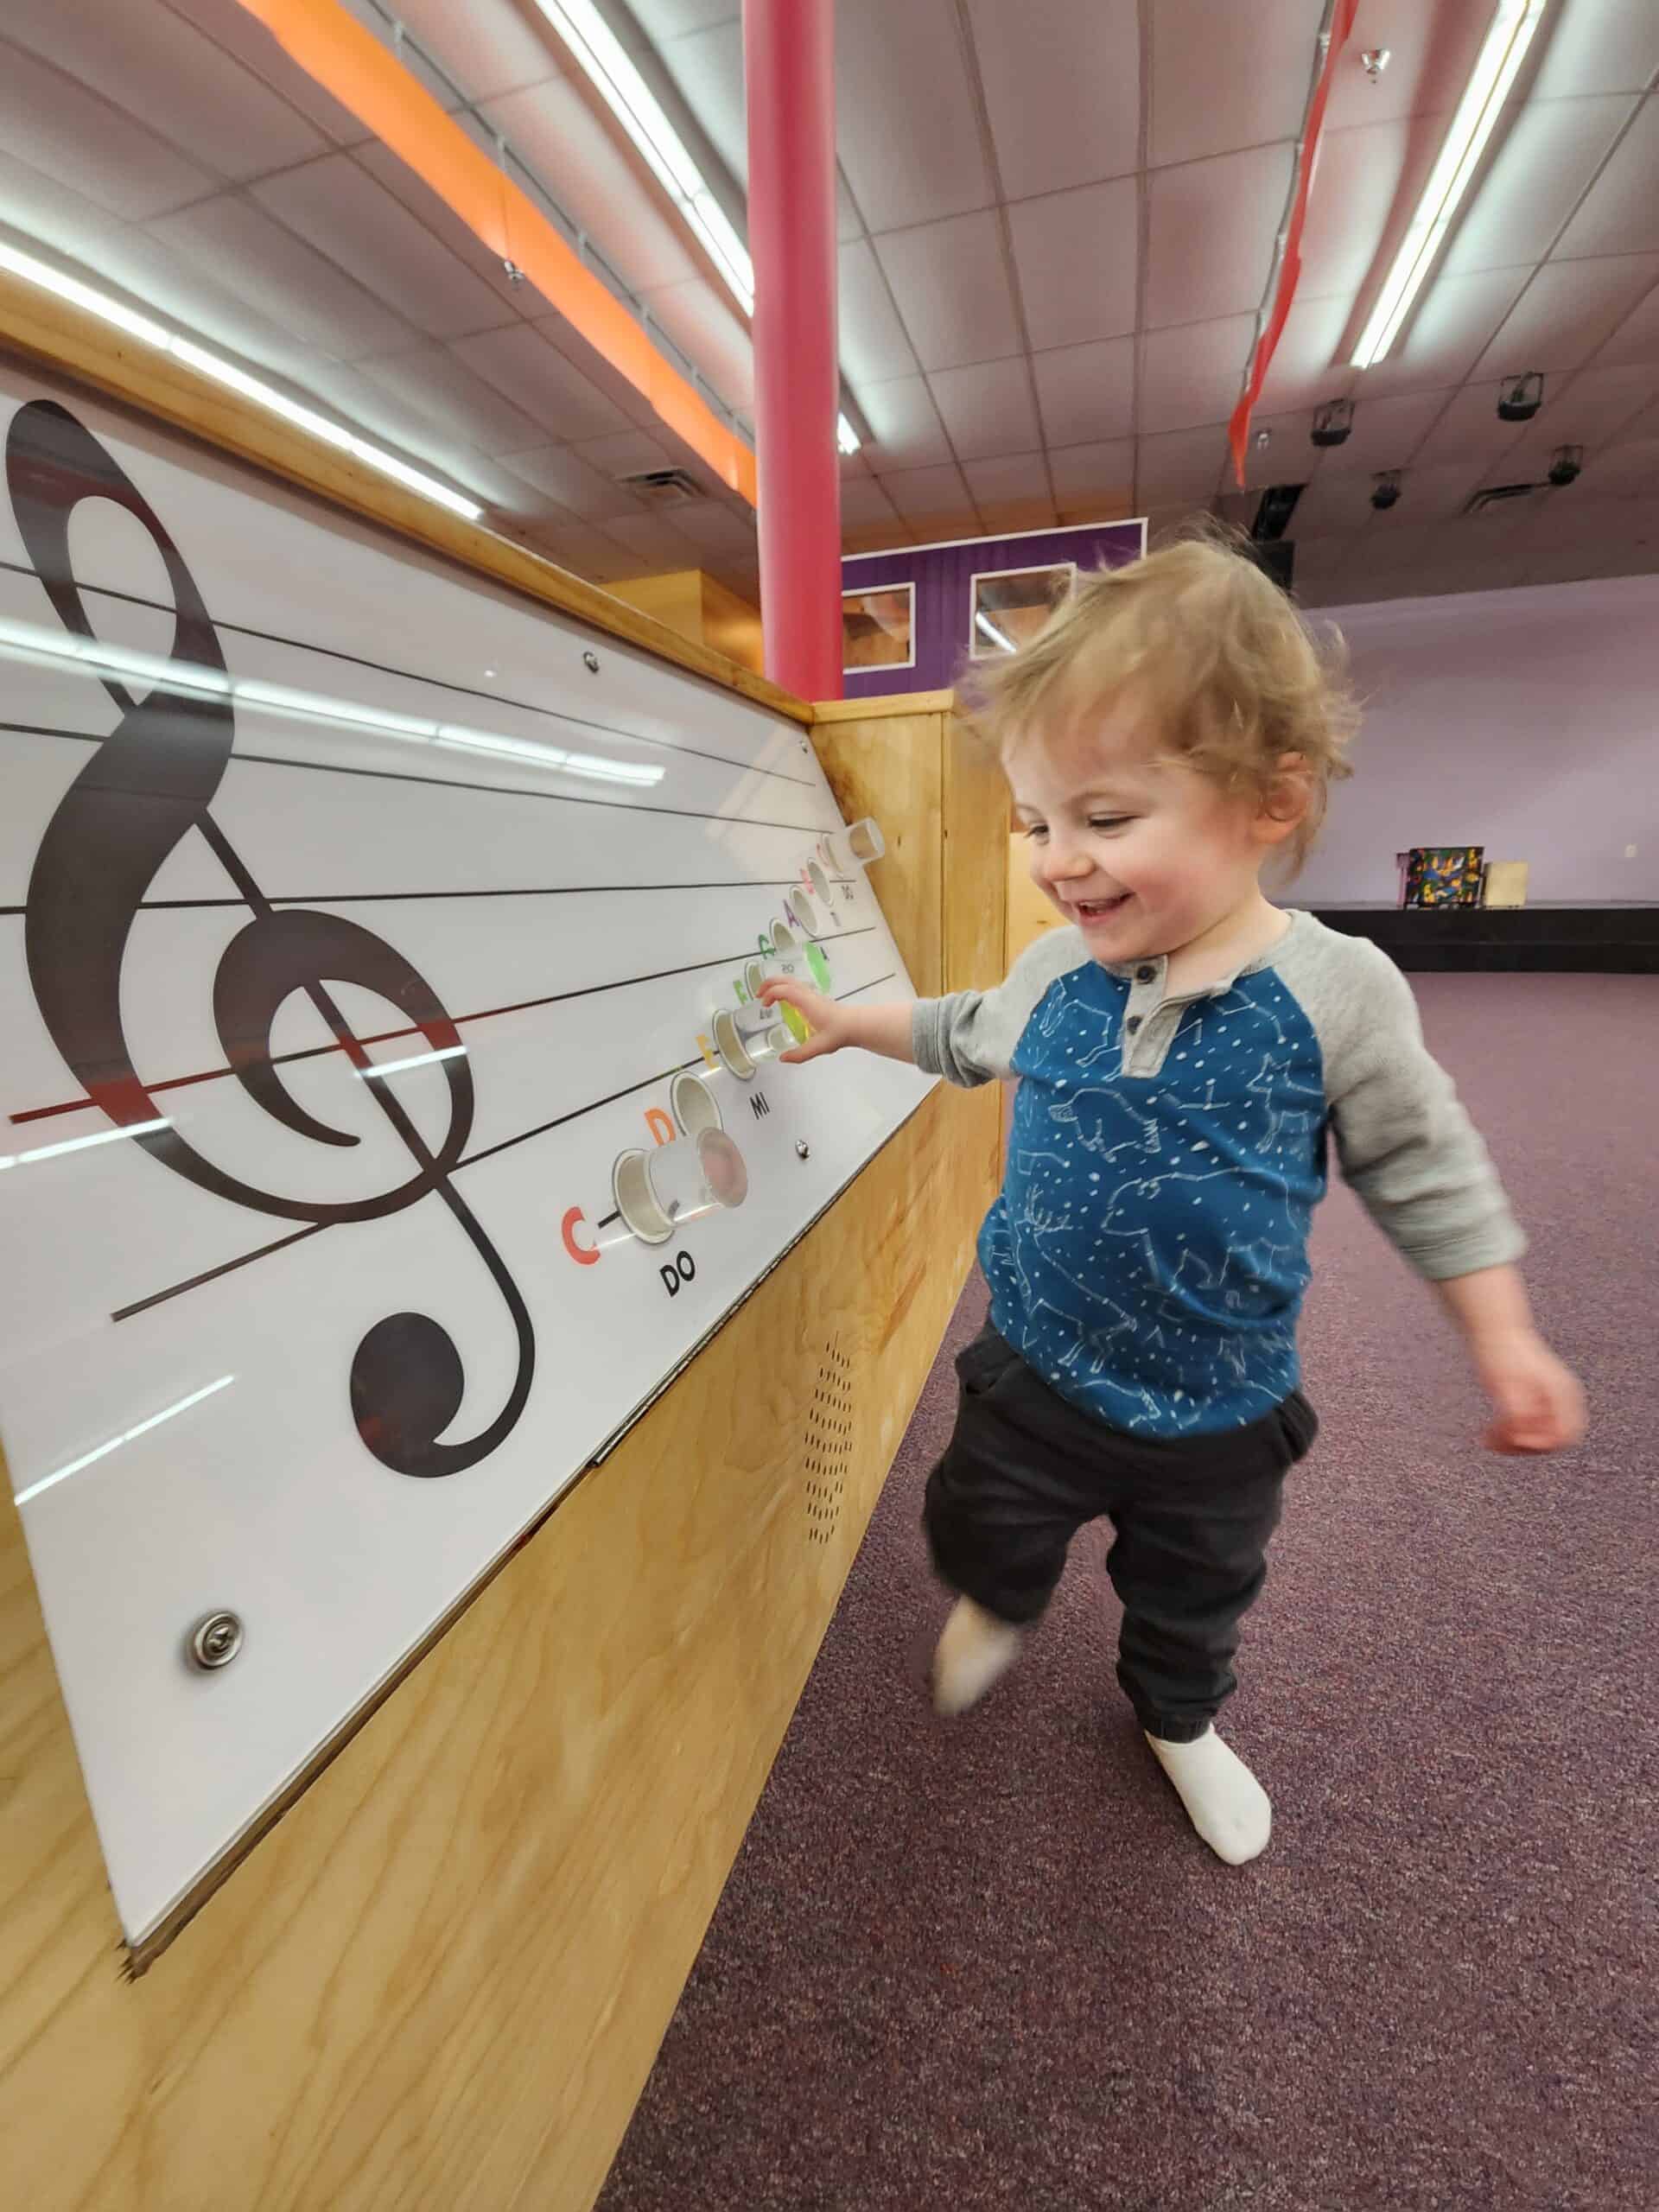 A smiling toddler interacts with a musical wall display featuring a large treble clef and a series of buttons labeled with musical notes such as "C" and "D." The child appears engaged and happy in the colorful, indoor play area.